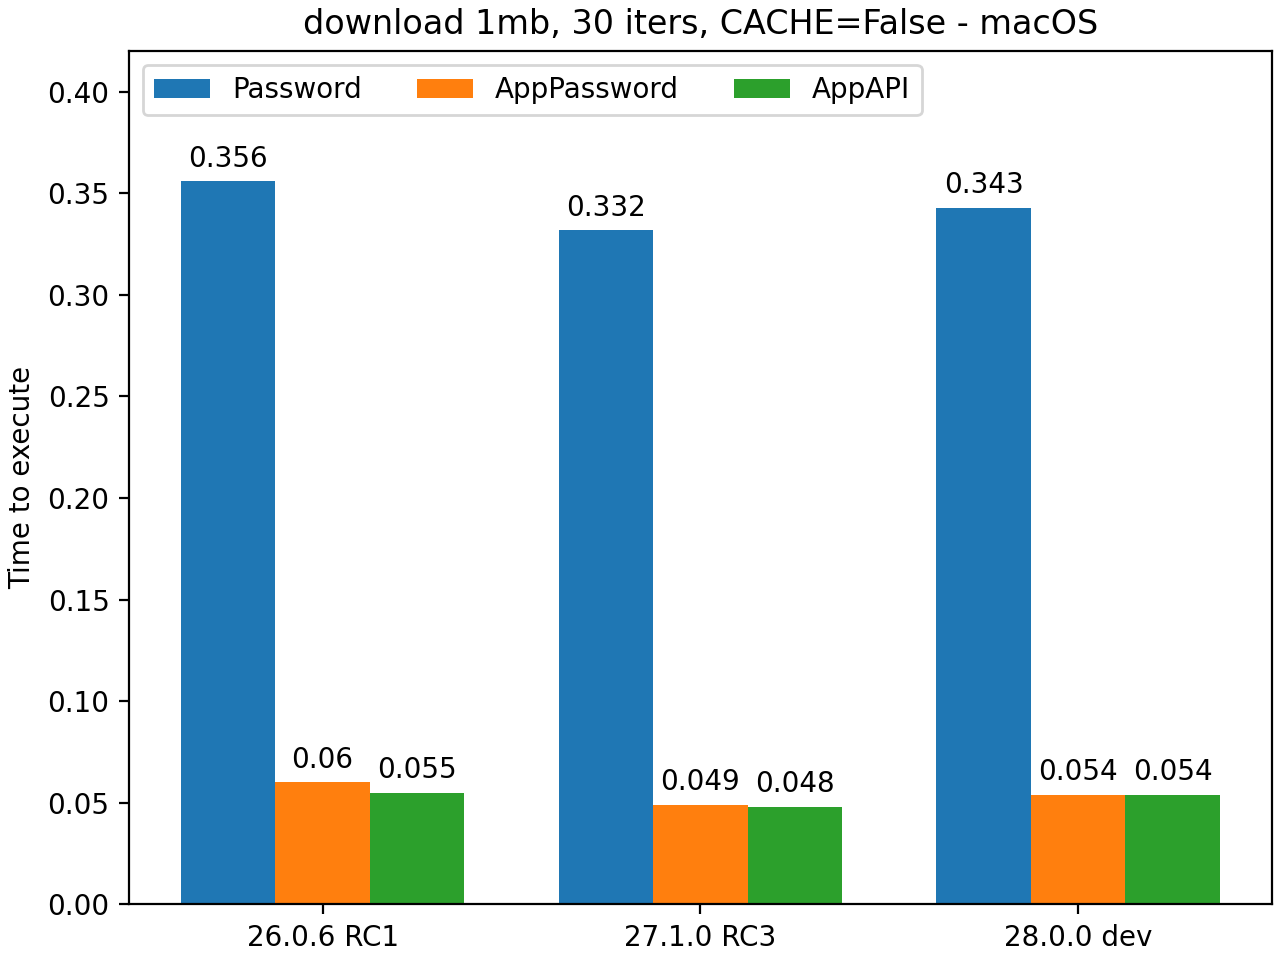 ../_images/dav_download_1mb__cache0_iters30__shurik.png